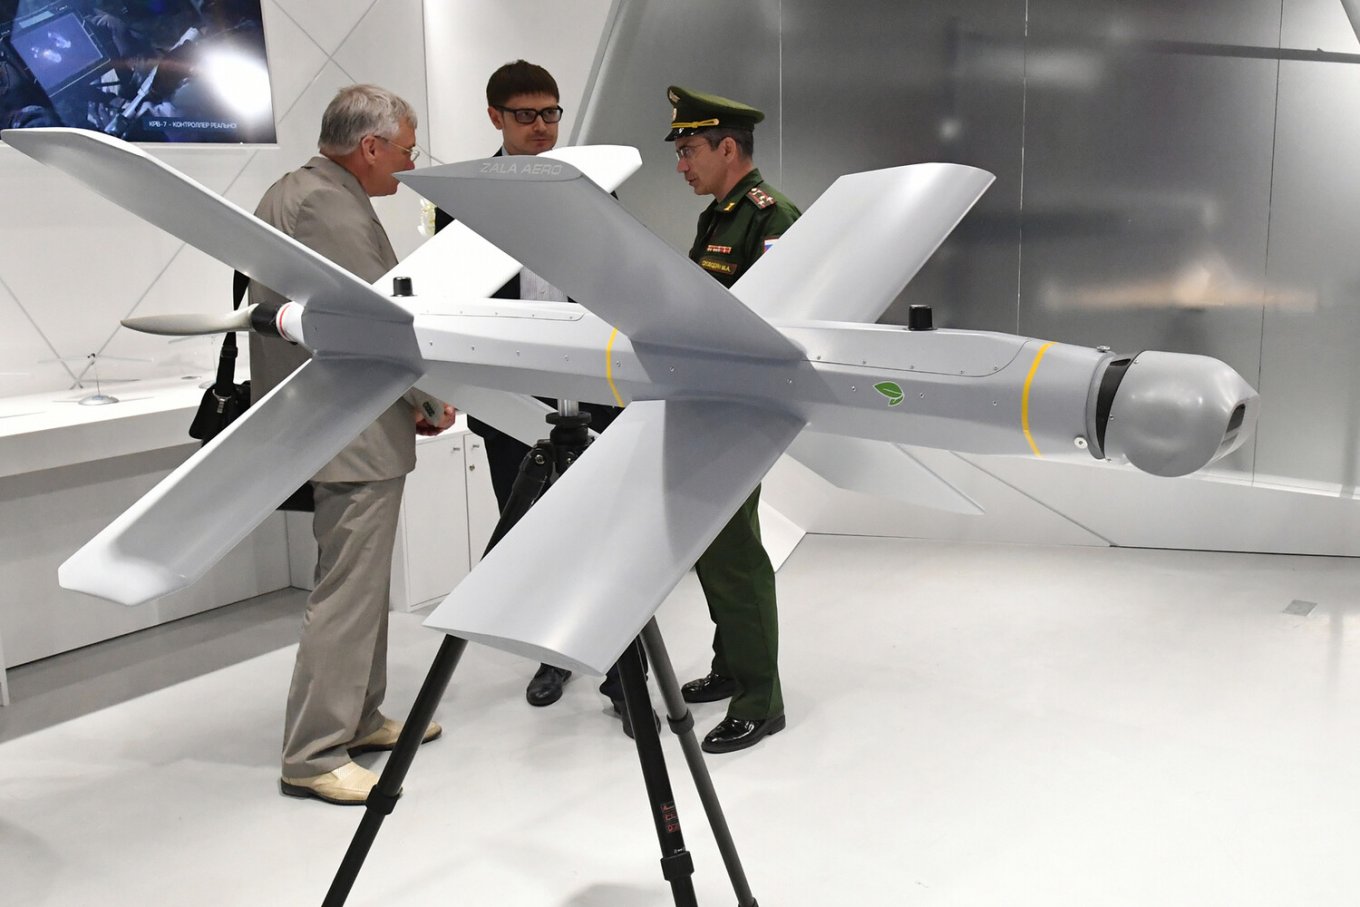 It Became Known How Many Scalpel Loitering Munition The Russian Invaders Received, How Much They Cost, The Lancet-3 loitering munition by Zala, Defense Express